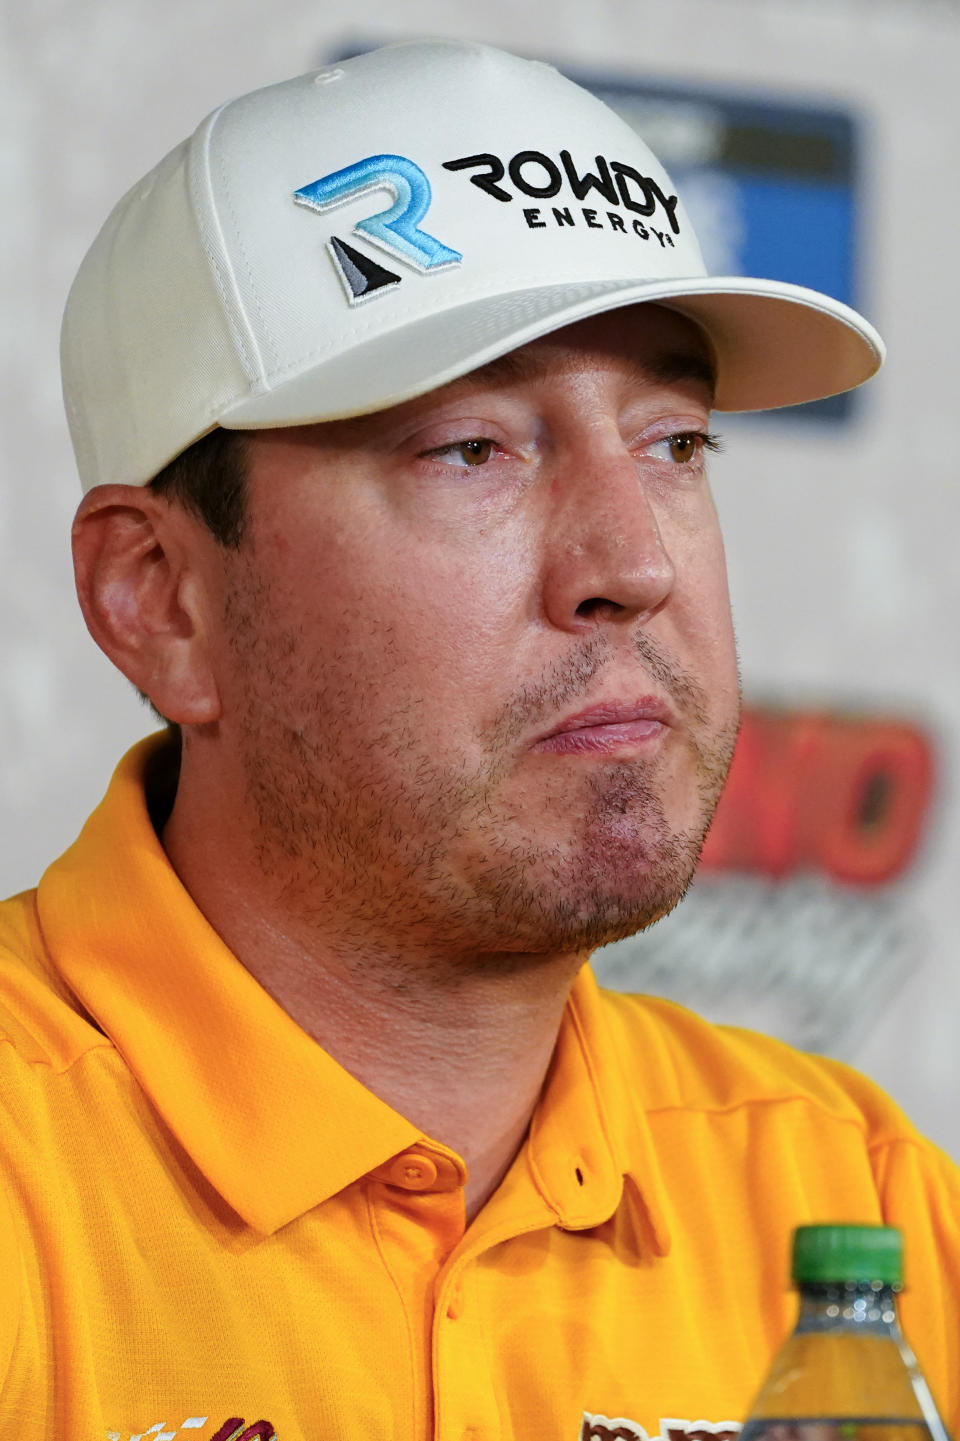 NASCAR Cup Series driver Kyle Busch answers questions at a news conference between series races and Cup qualifying at Pocono Raceway, Saturday, July 23, 2022 in Long Pond, Pa. Busch's deal with Joe Gibbs Racing expires at the end of the season and the two-time Cup Series champion is getting antsy for a new deal. (AP Photo/Matt Slocum)